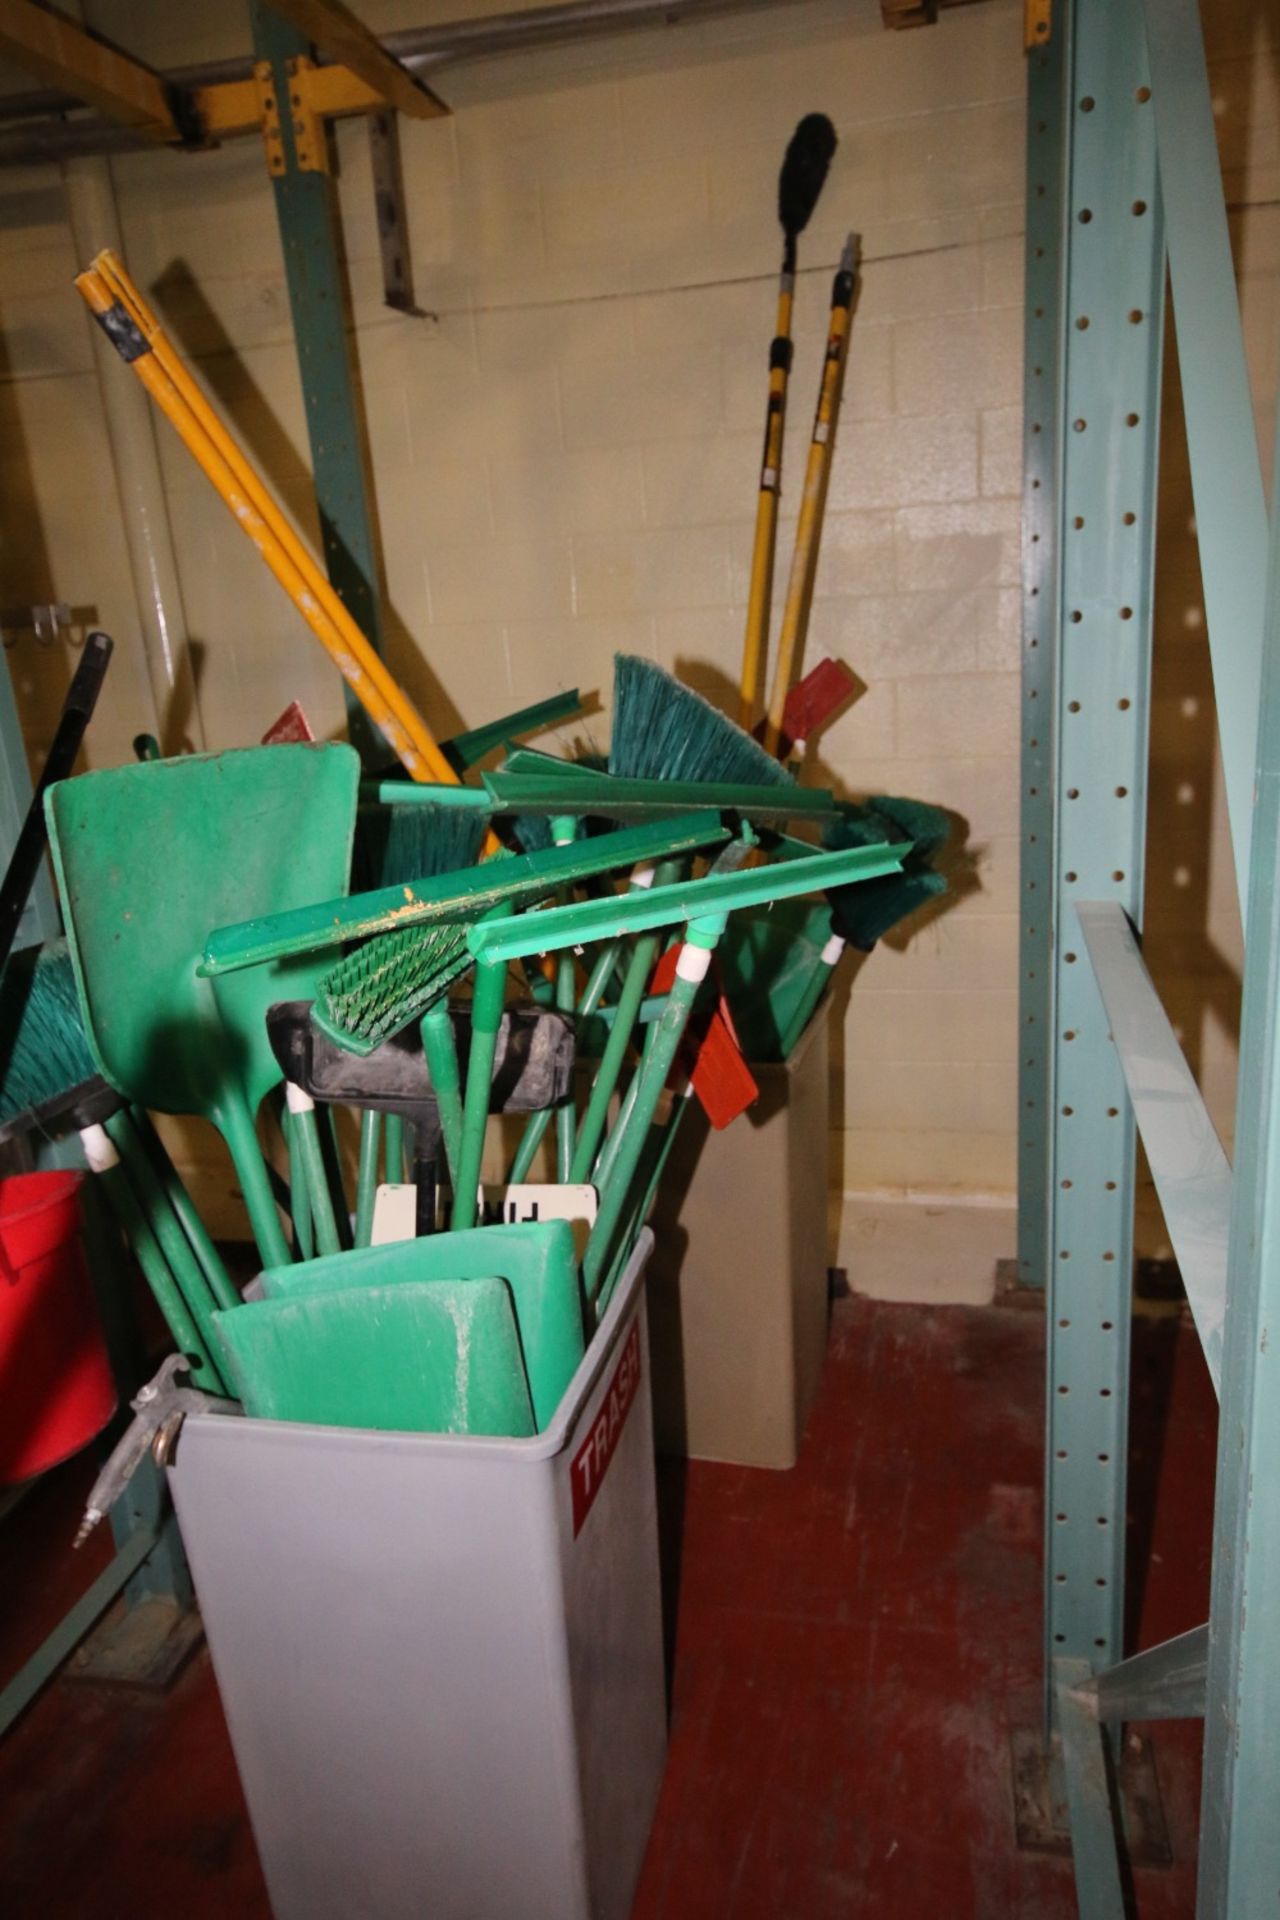 Assorted Janitorial Supplies including Wash Baskets, Brooms, Shovels and Squeegees - Image 2 of 2